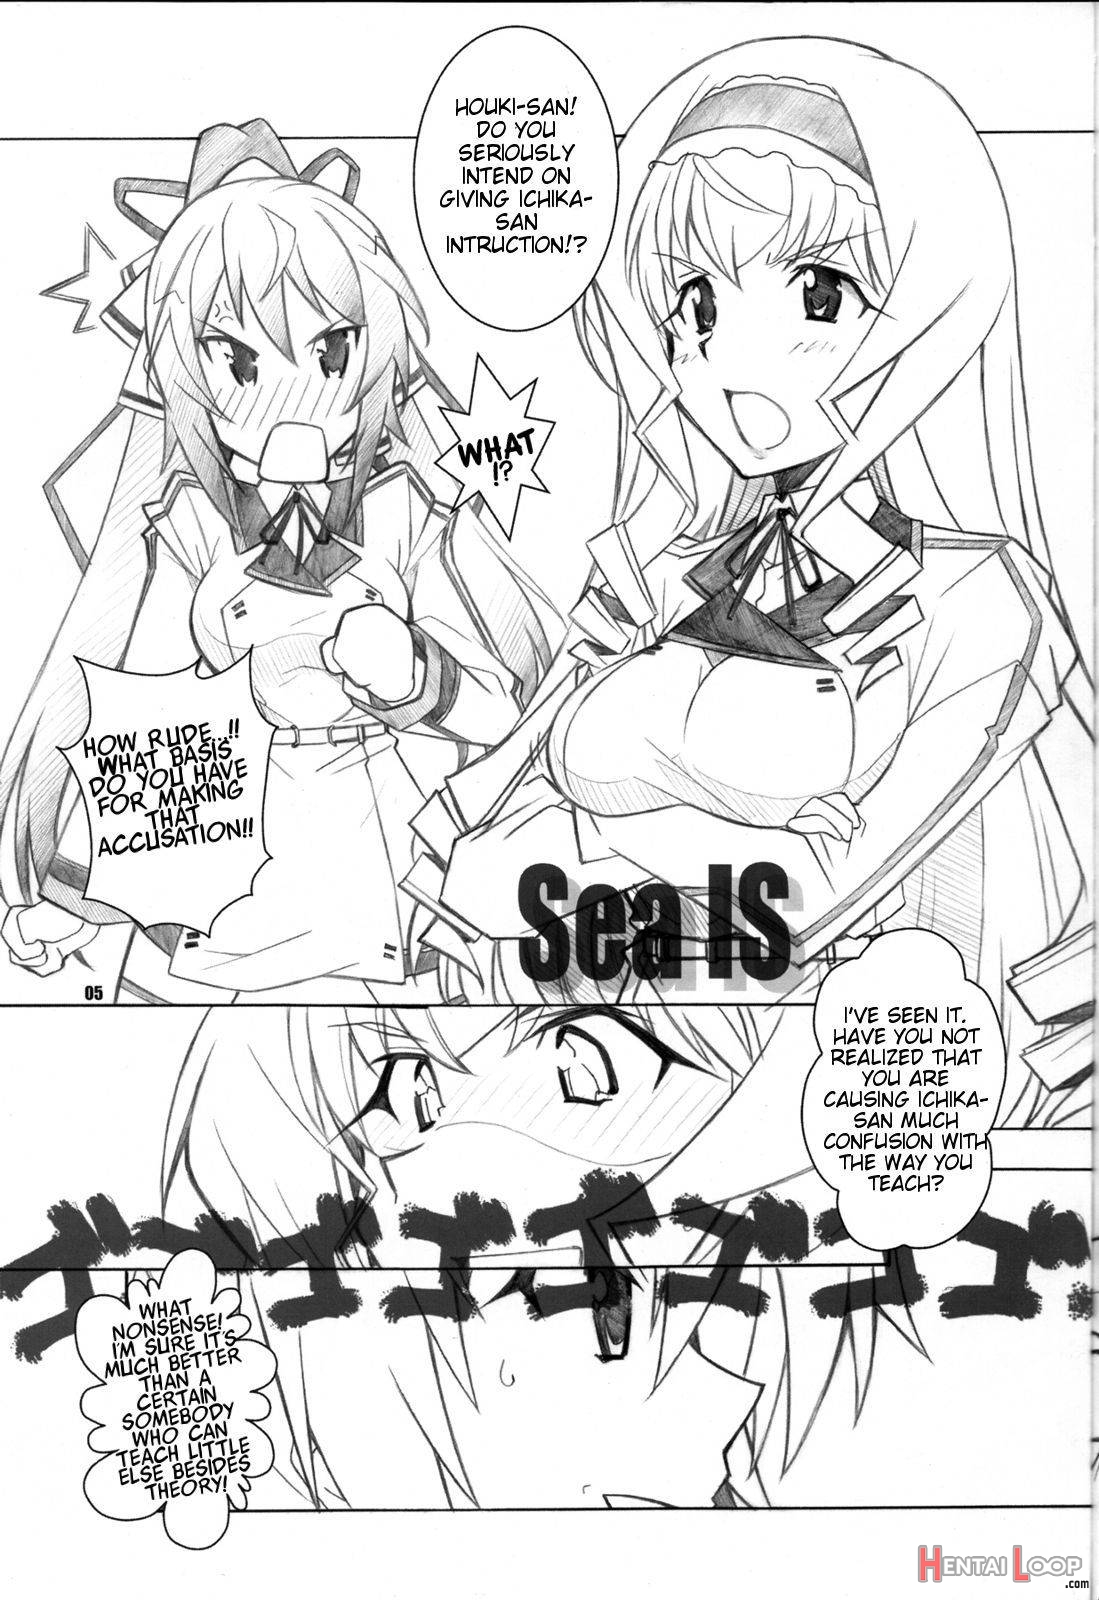 SEA IS page 4